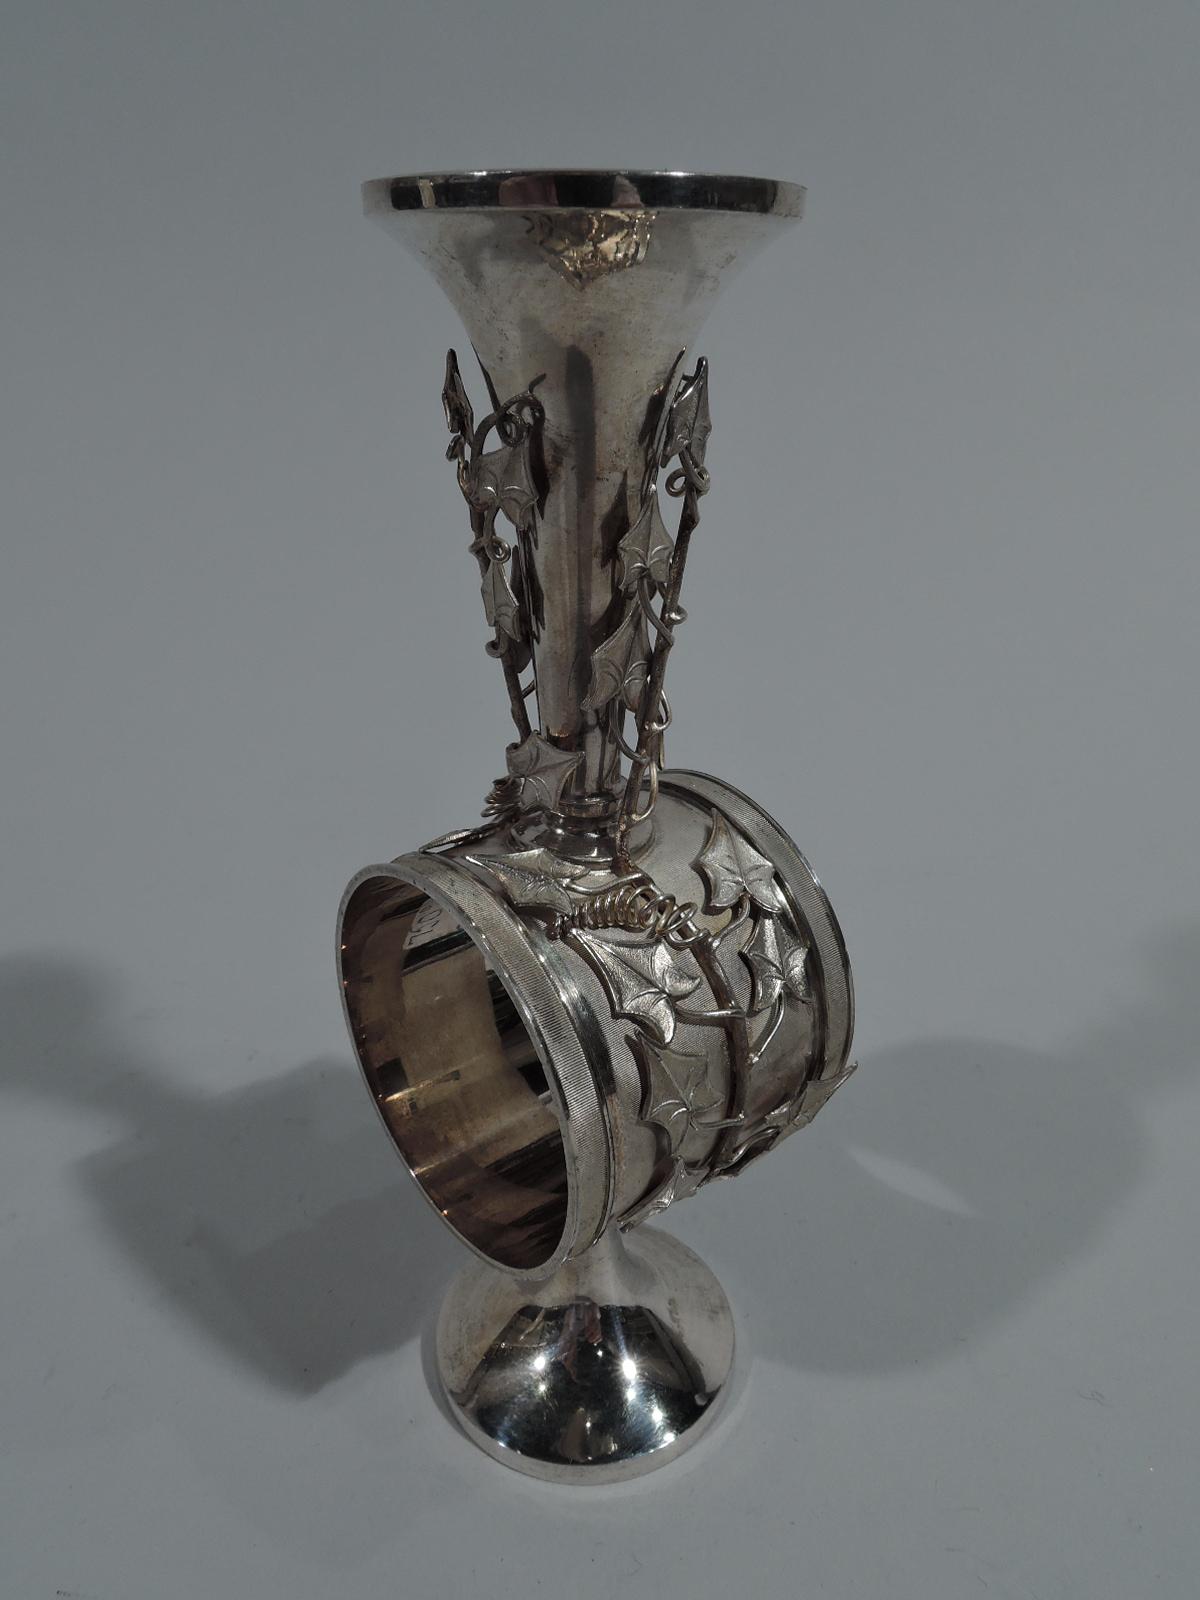 Aesthetic sterling silver napkin ring. Made by Whiting in New York, circa 1885. Conical bud vase mounted to ring, in turn, mounted to raised and plain foot. Ring finely ribbed with applied ivy vine that climbs up vase sides. Fully marked and